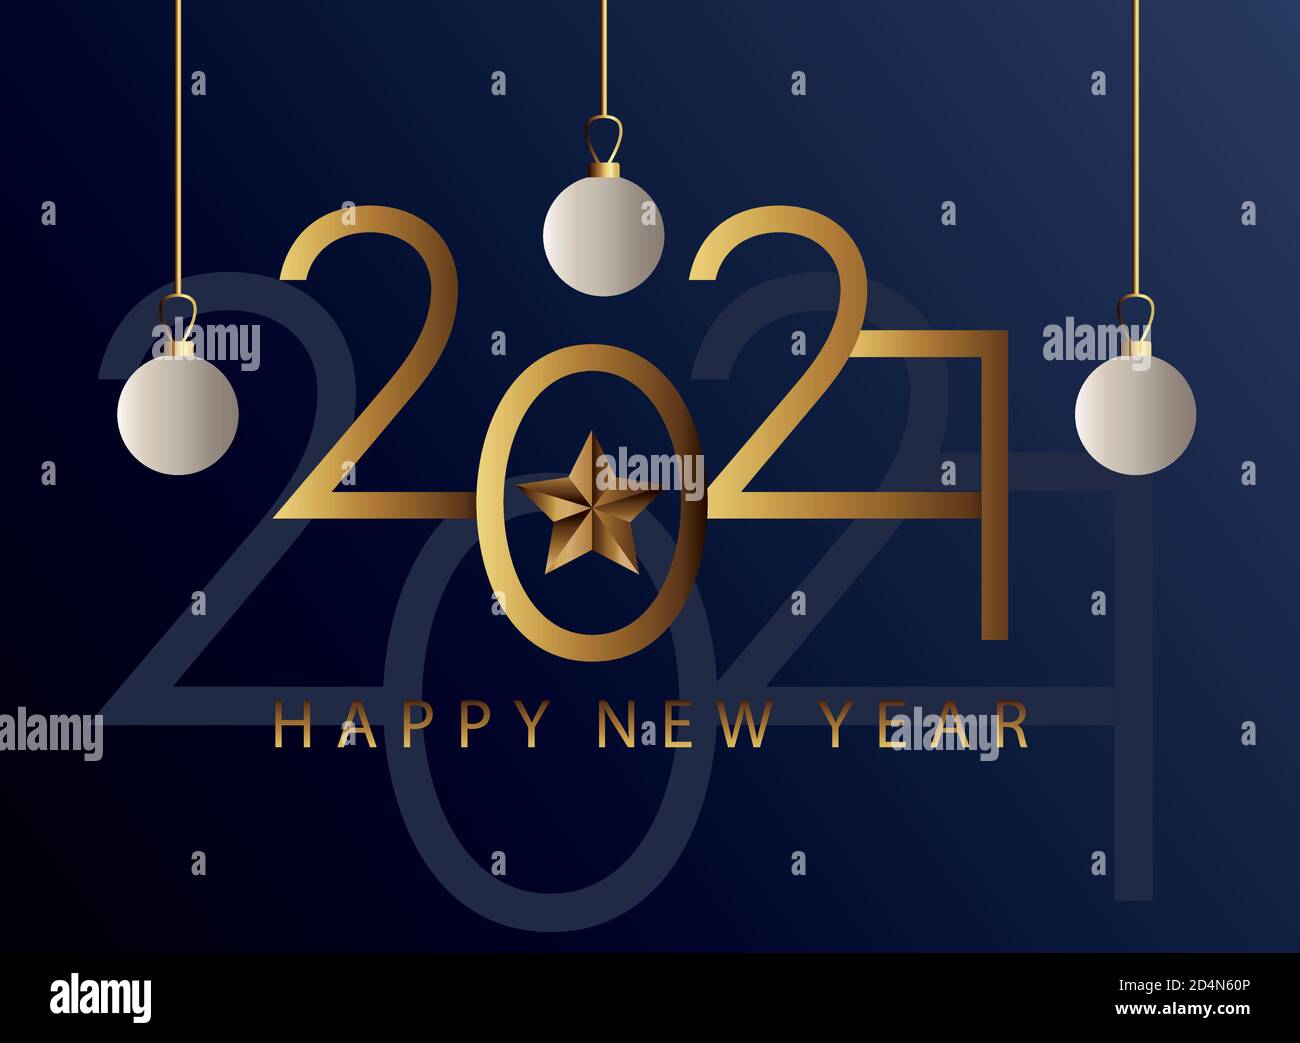 happy new year 2021 golden lettering and balls hanging vector illustration design Stock Vector